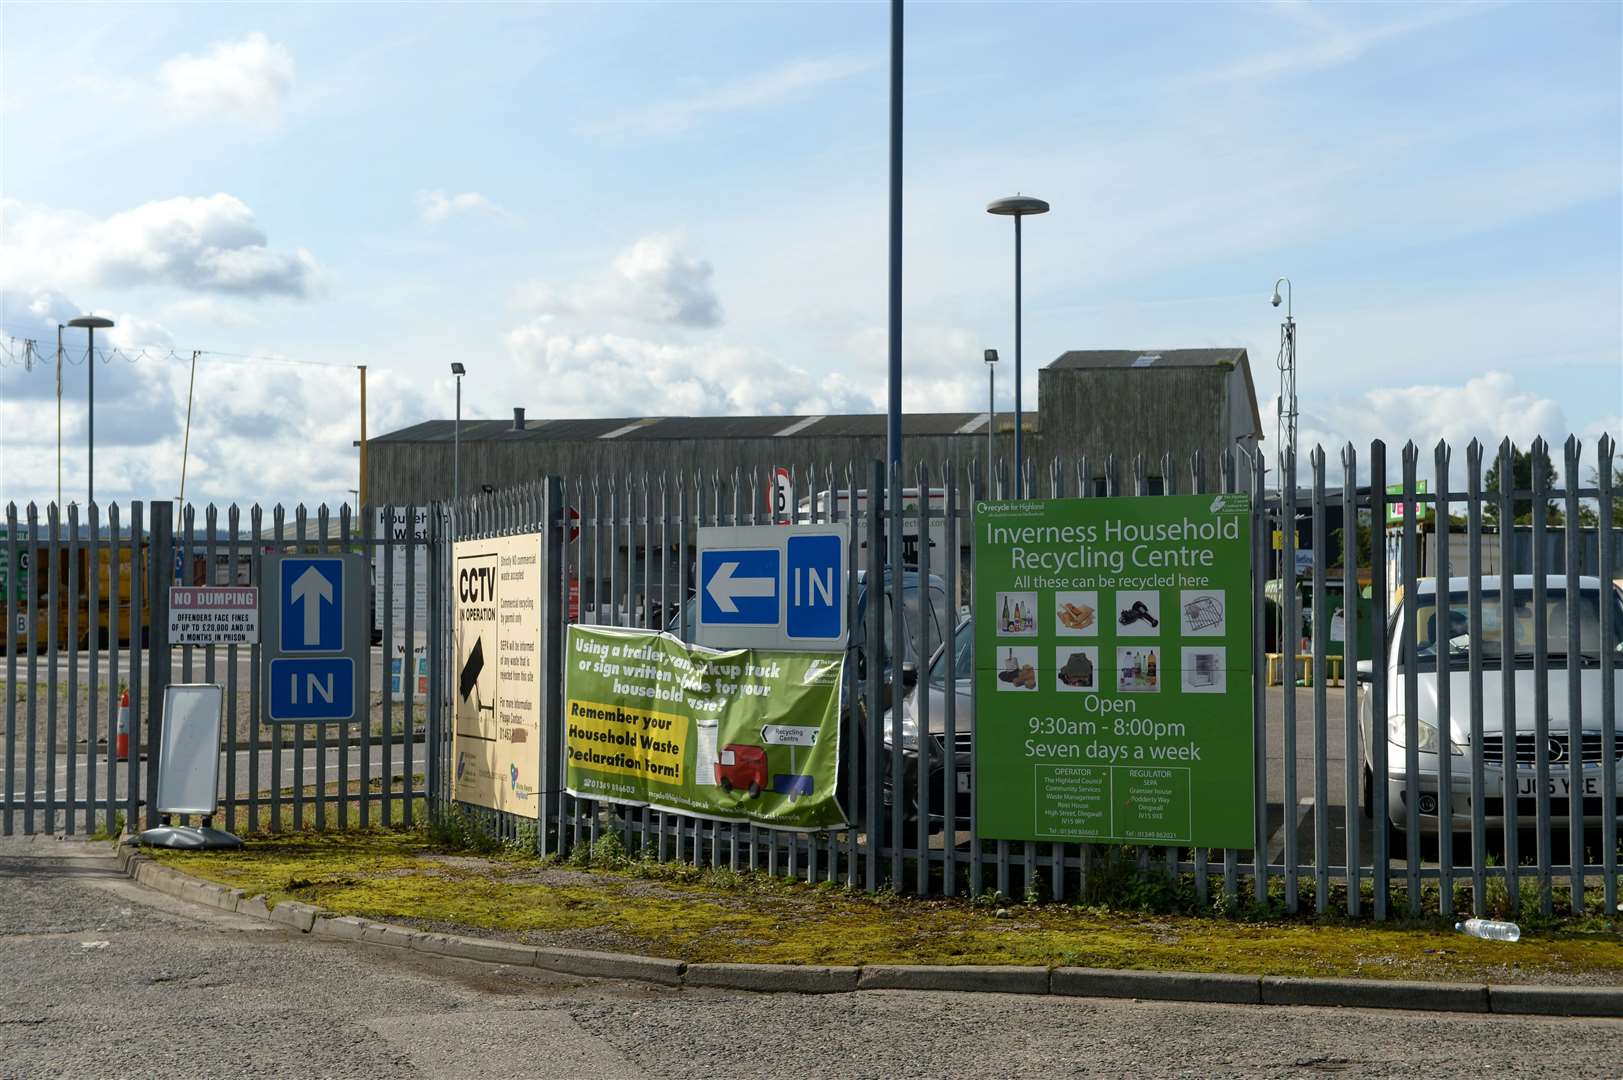 Recycling centres across the Highlands have been closed in response to coronavirus.